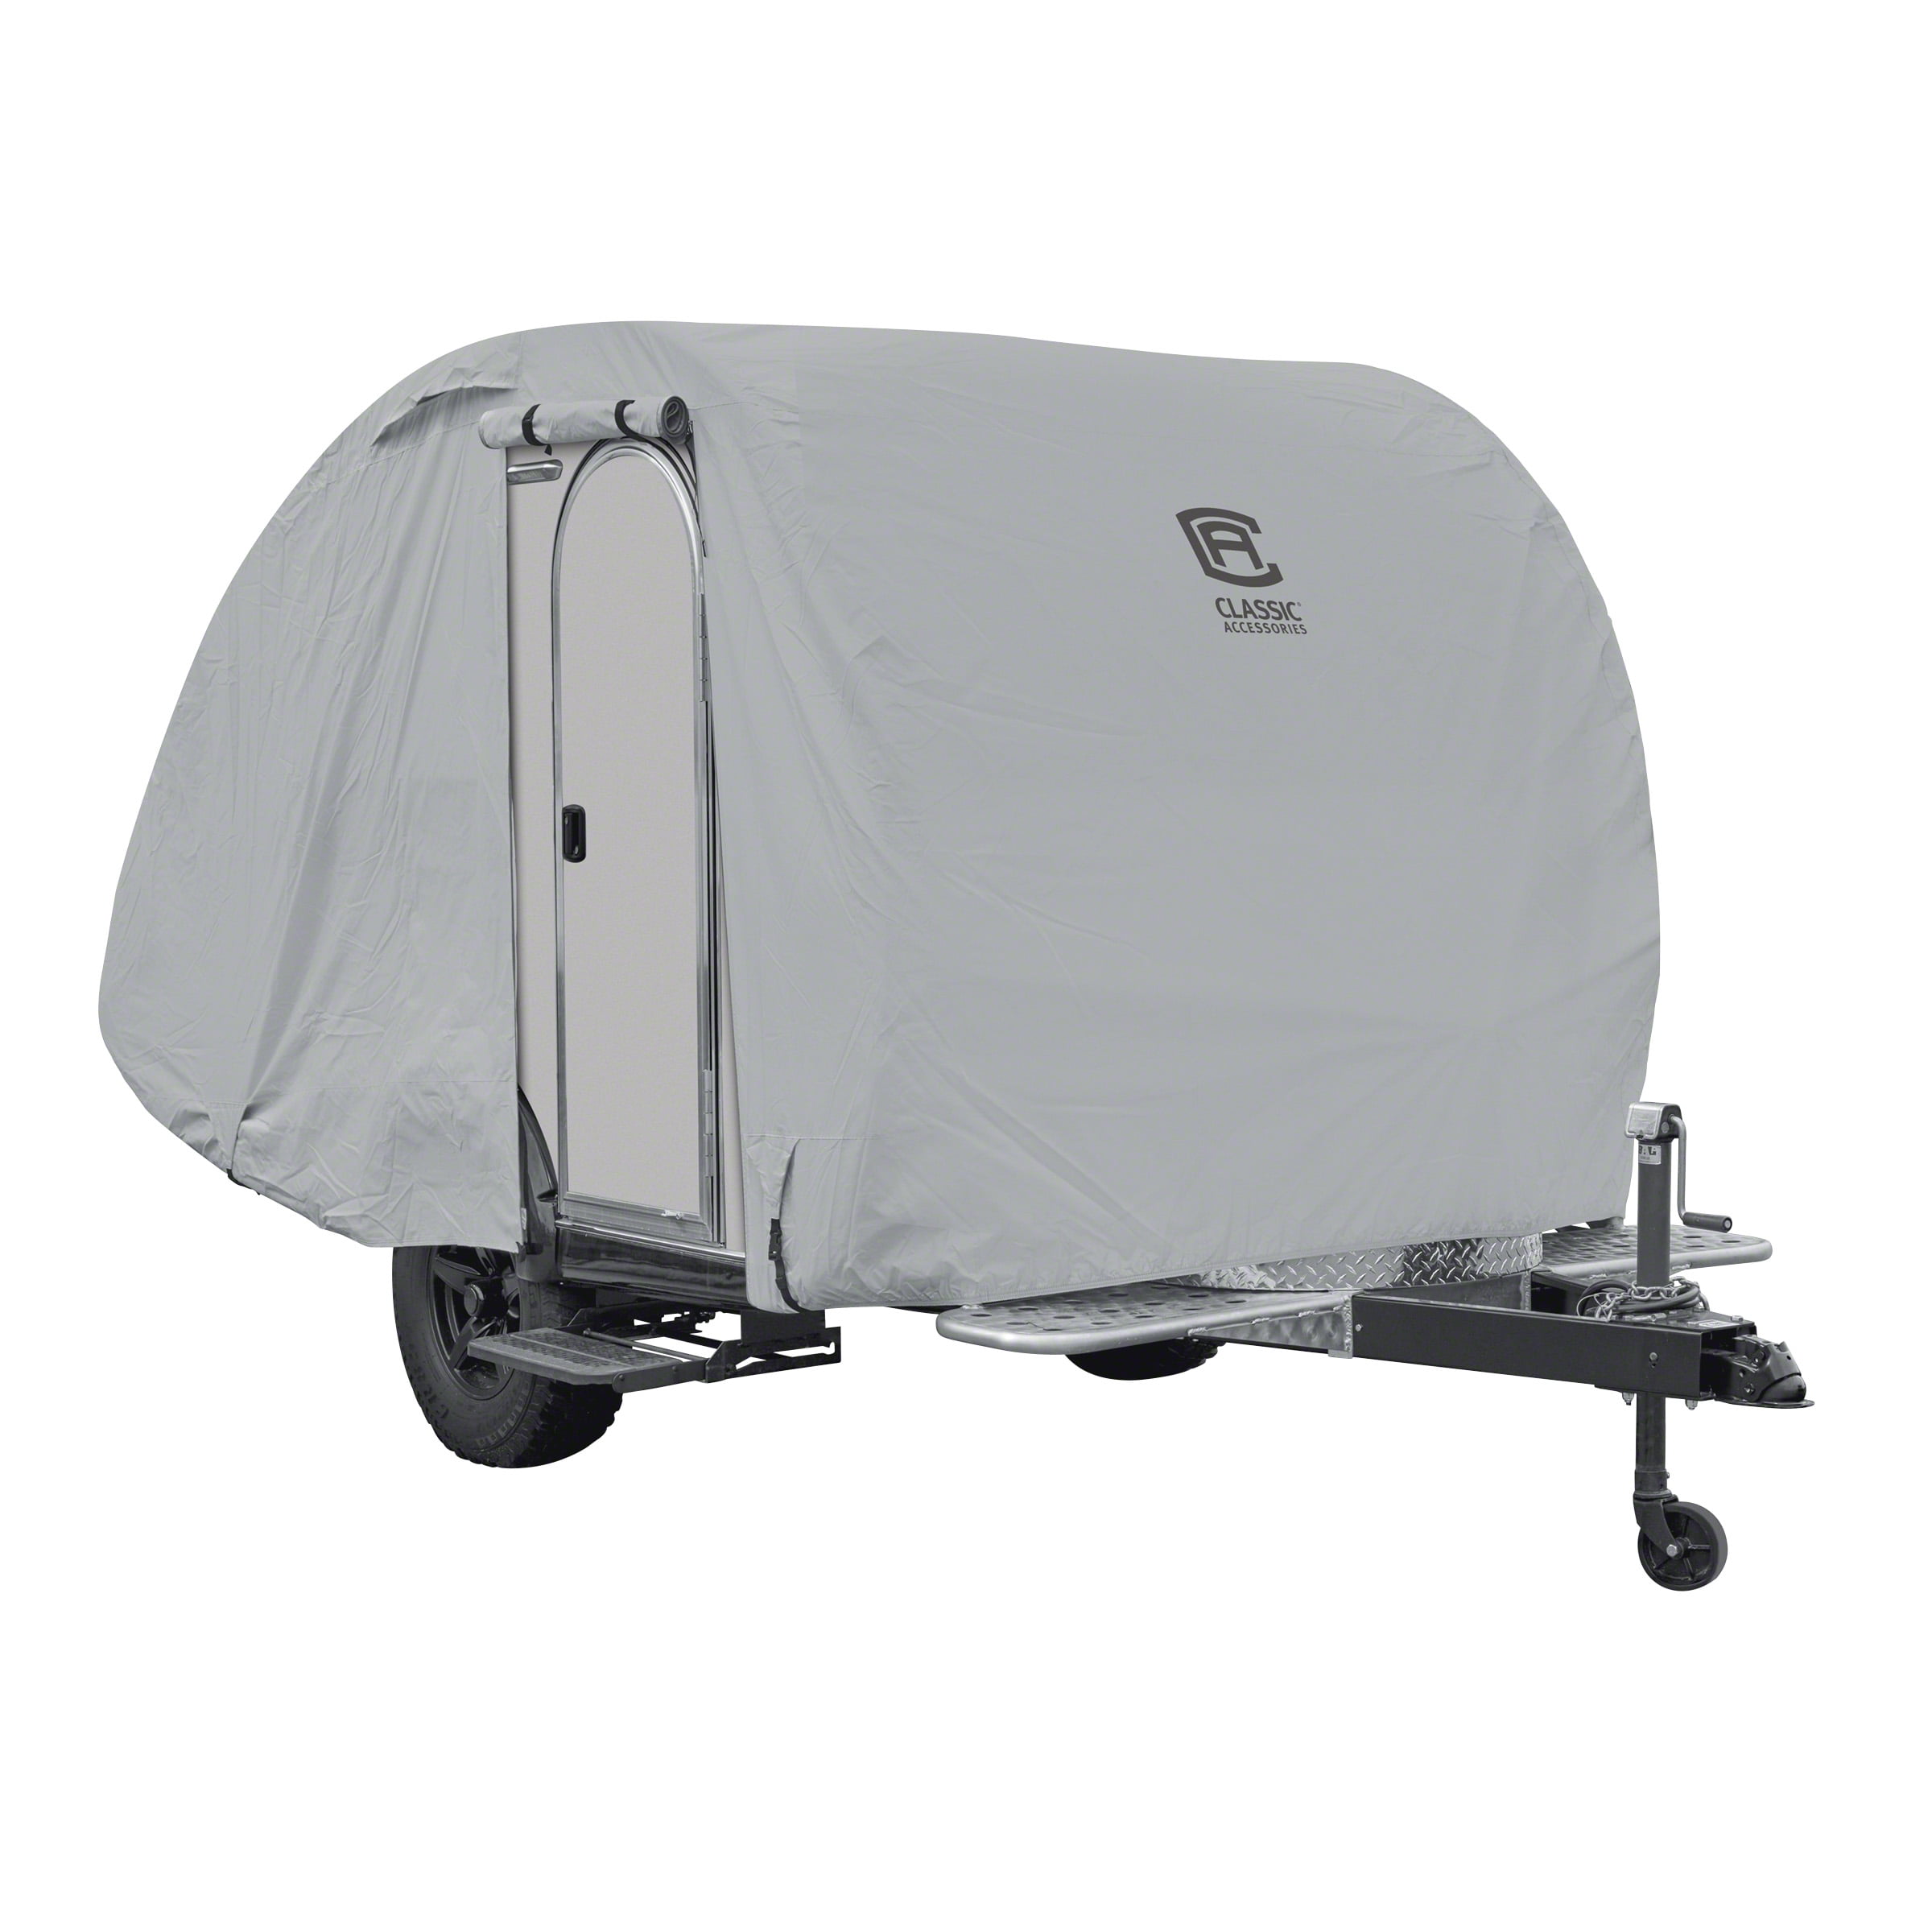 RP-176 RP-176T RP-172 Waterproof Superior Teardrop R-Pod Travel Trailer Storage Cover Fits Up To 18 8 Long and 6 Wide Trailers Direct Fitment for Forest River R-Pod Model RP-171 and RP-177